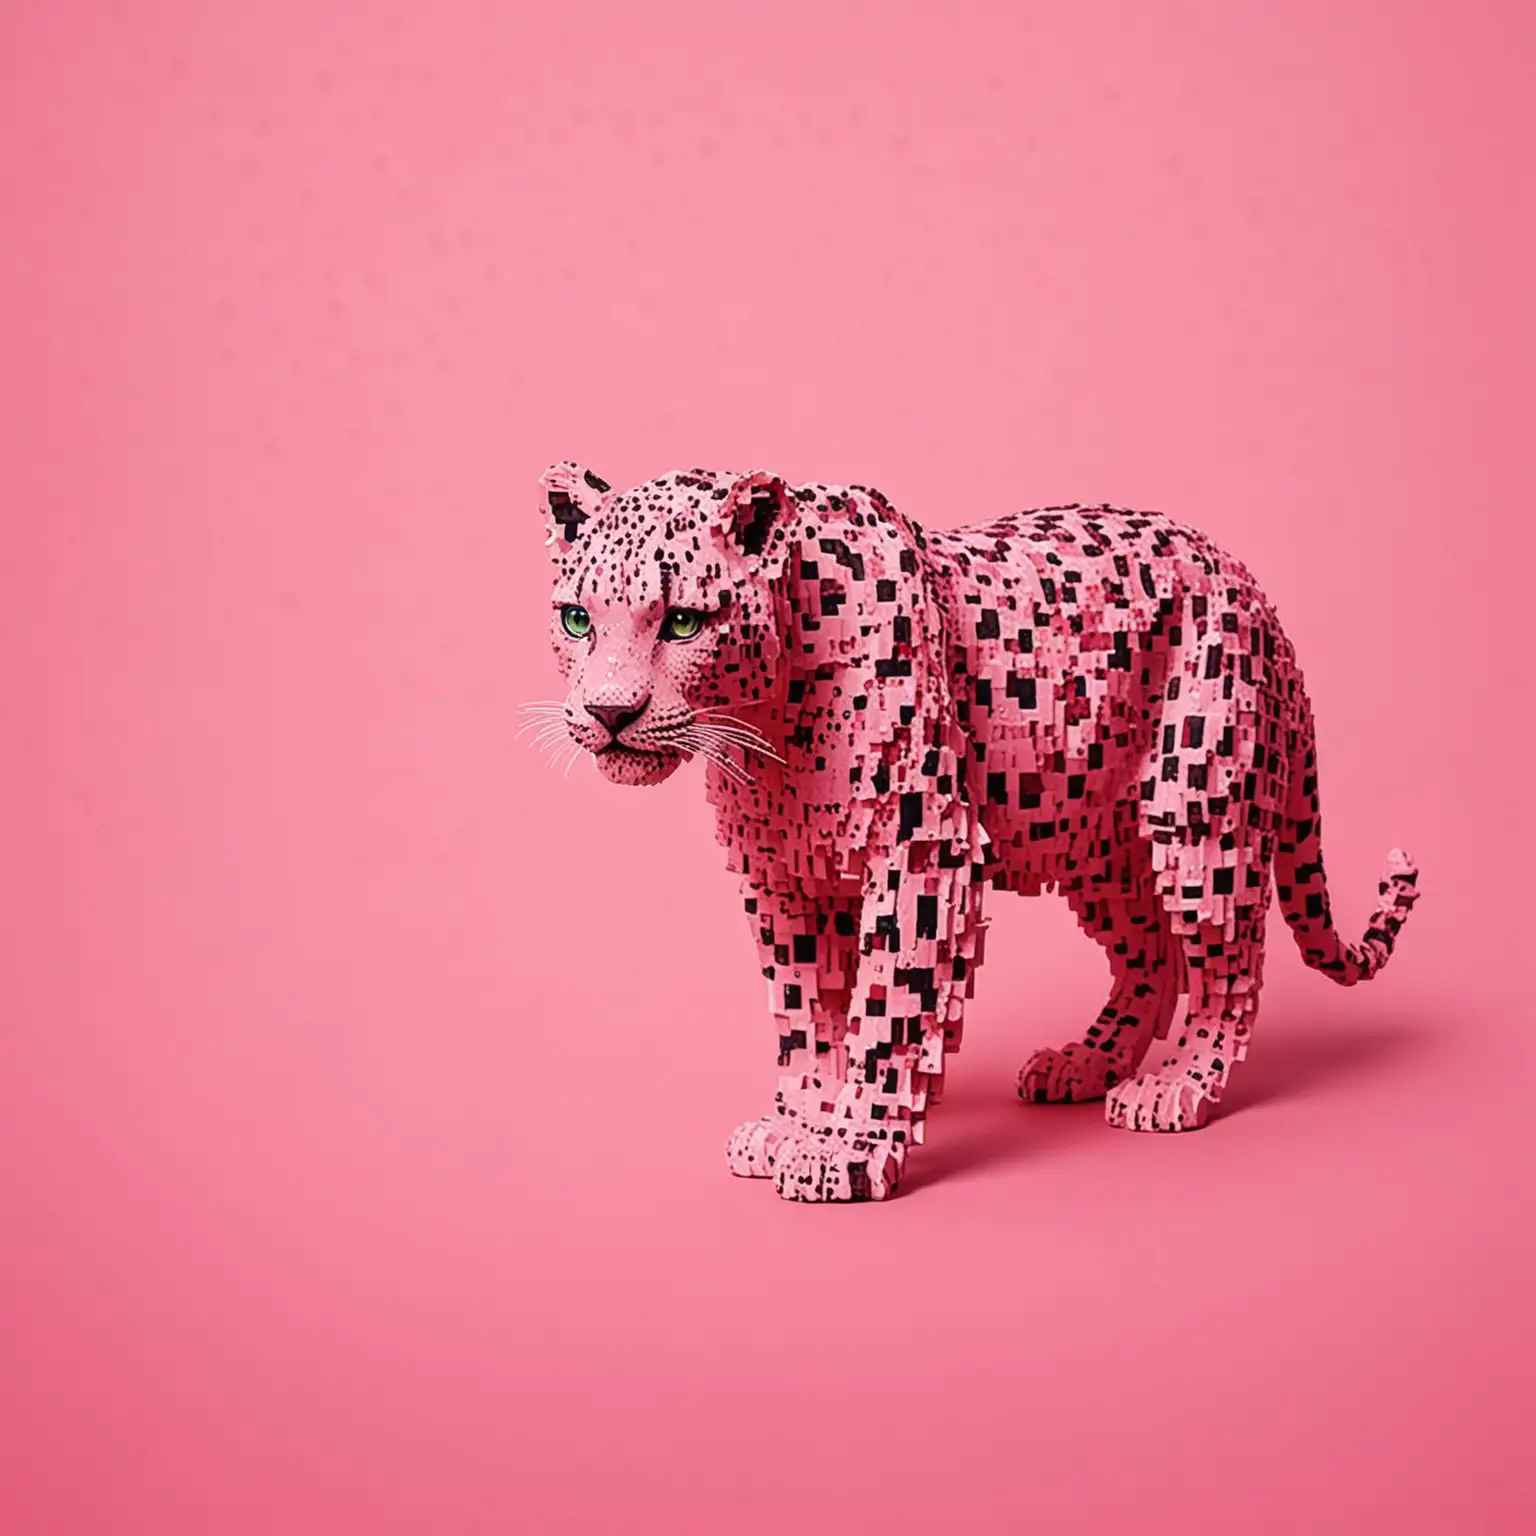 Pixelated Pink Leopard on Vibrant Pink Background